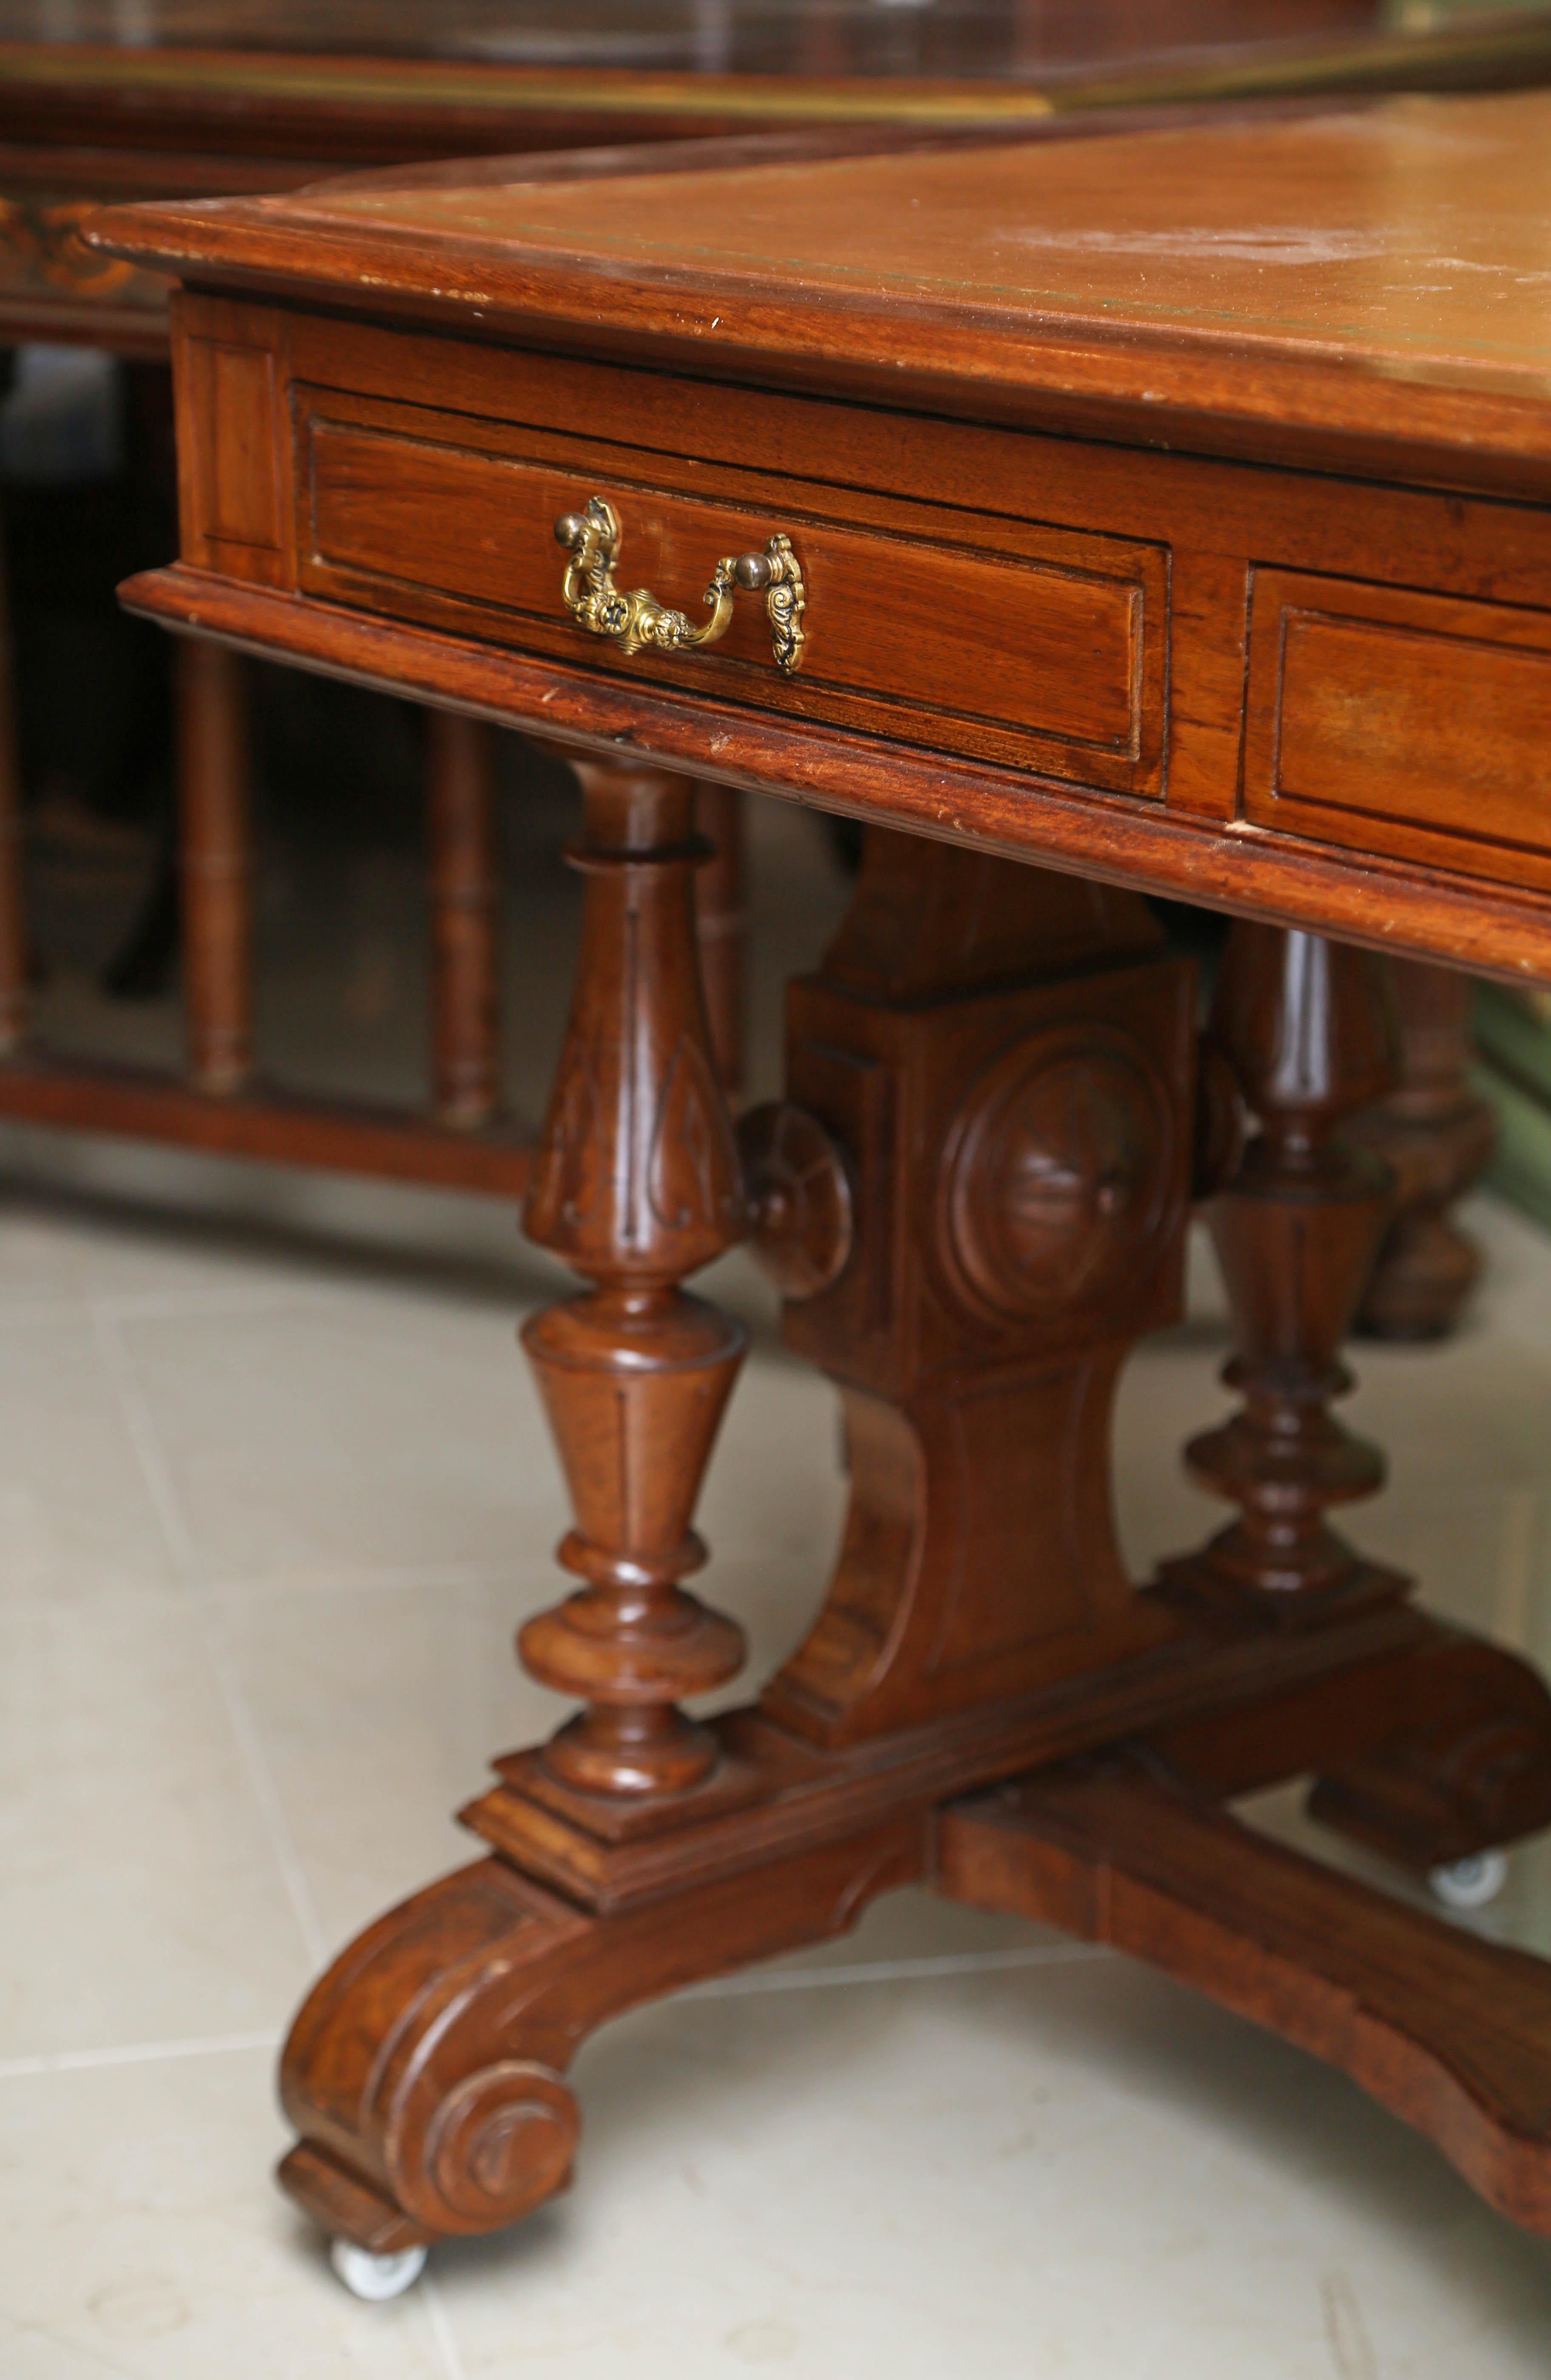 American oak partners desk leather top east lake style brass handles. This is a very nice excellent condition solid oak partners desk with a brown leather top with gold tooling to the outside.
It sits on large turned bulbous legs finally